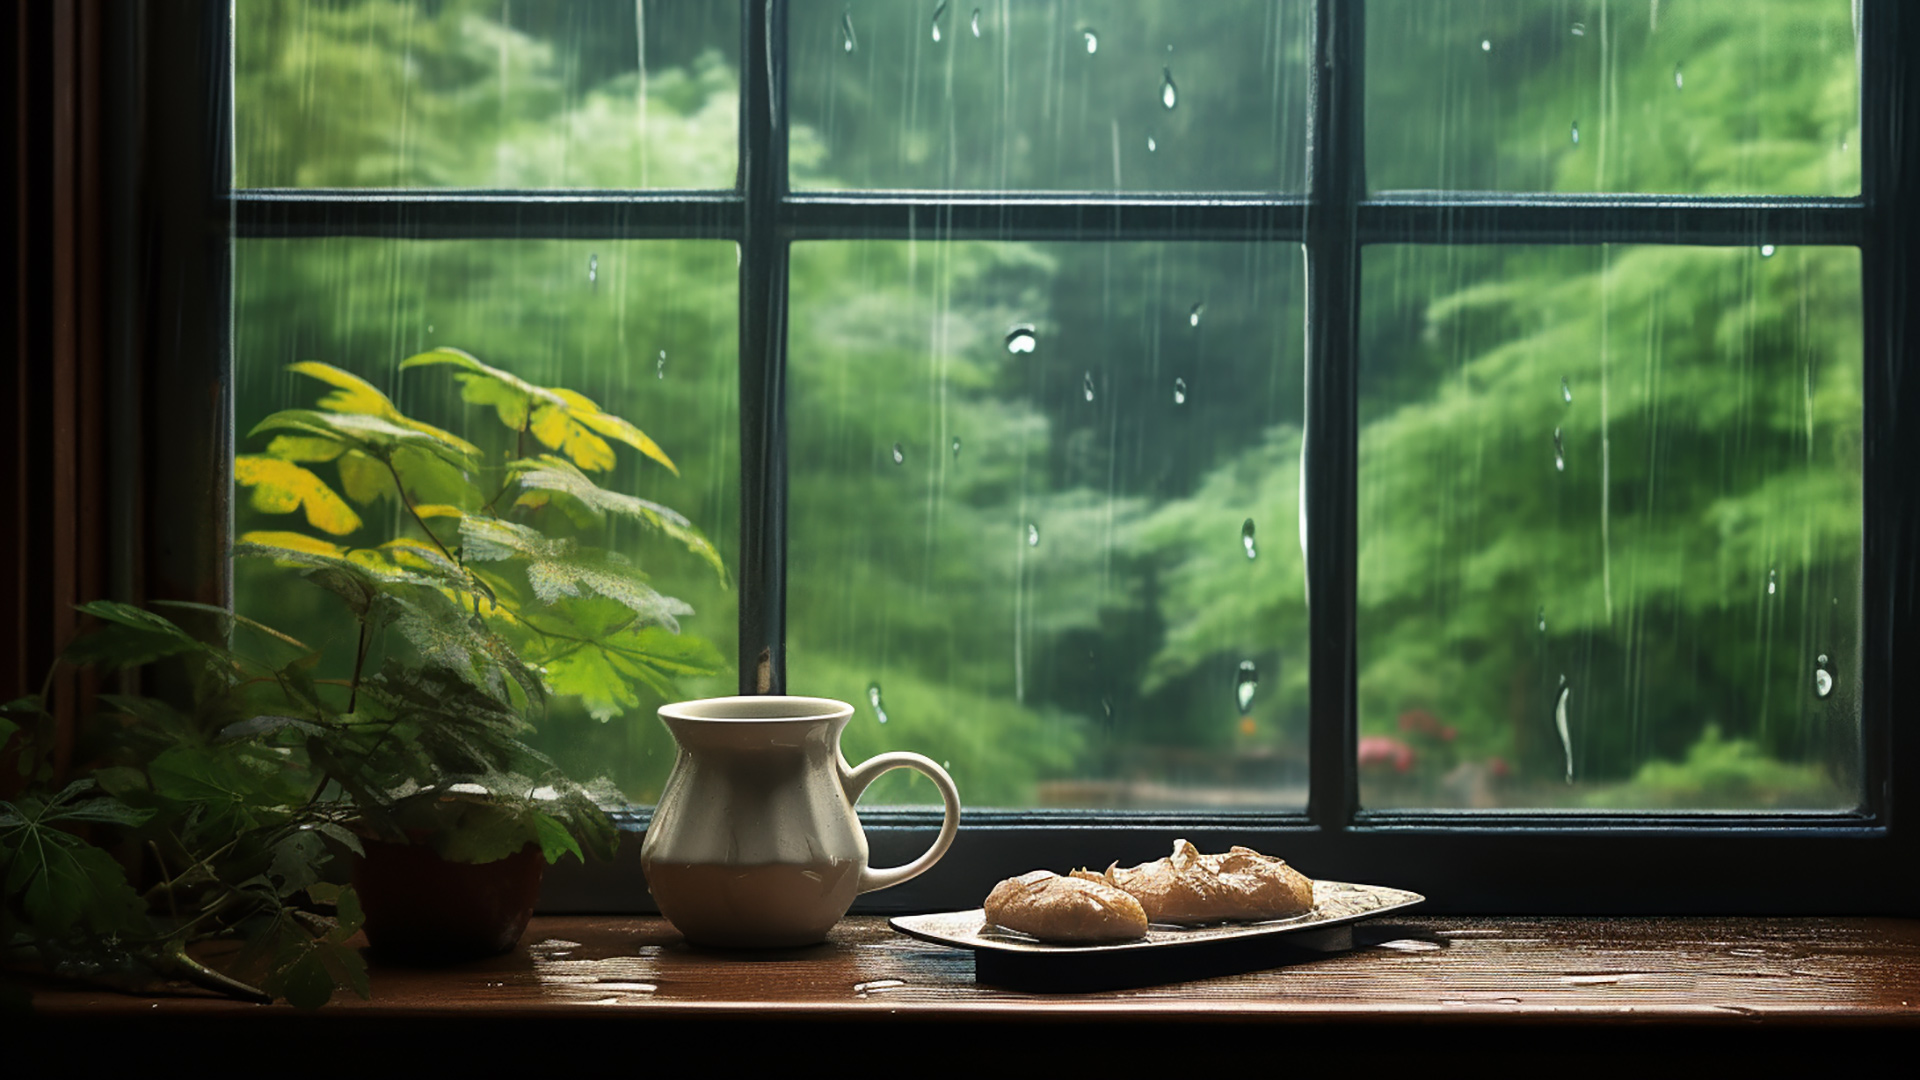 Rainy window wallpapers to create a cozy home office ambiance